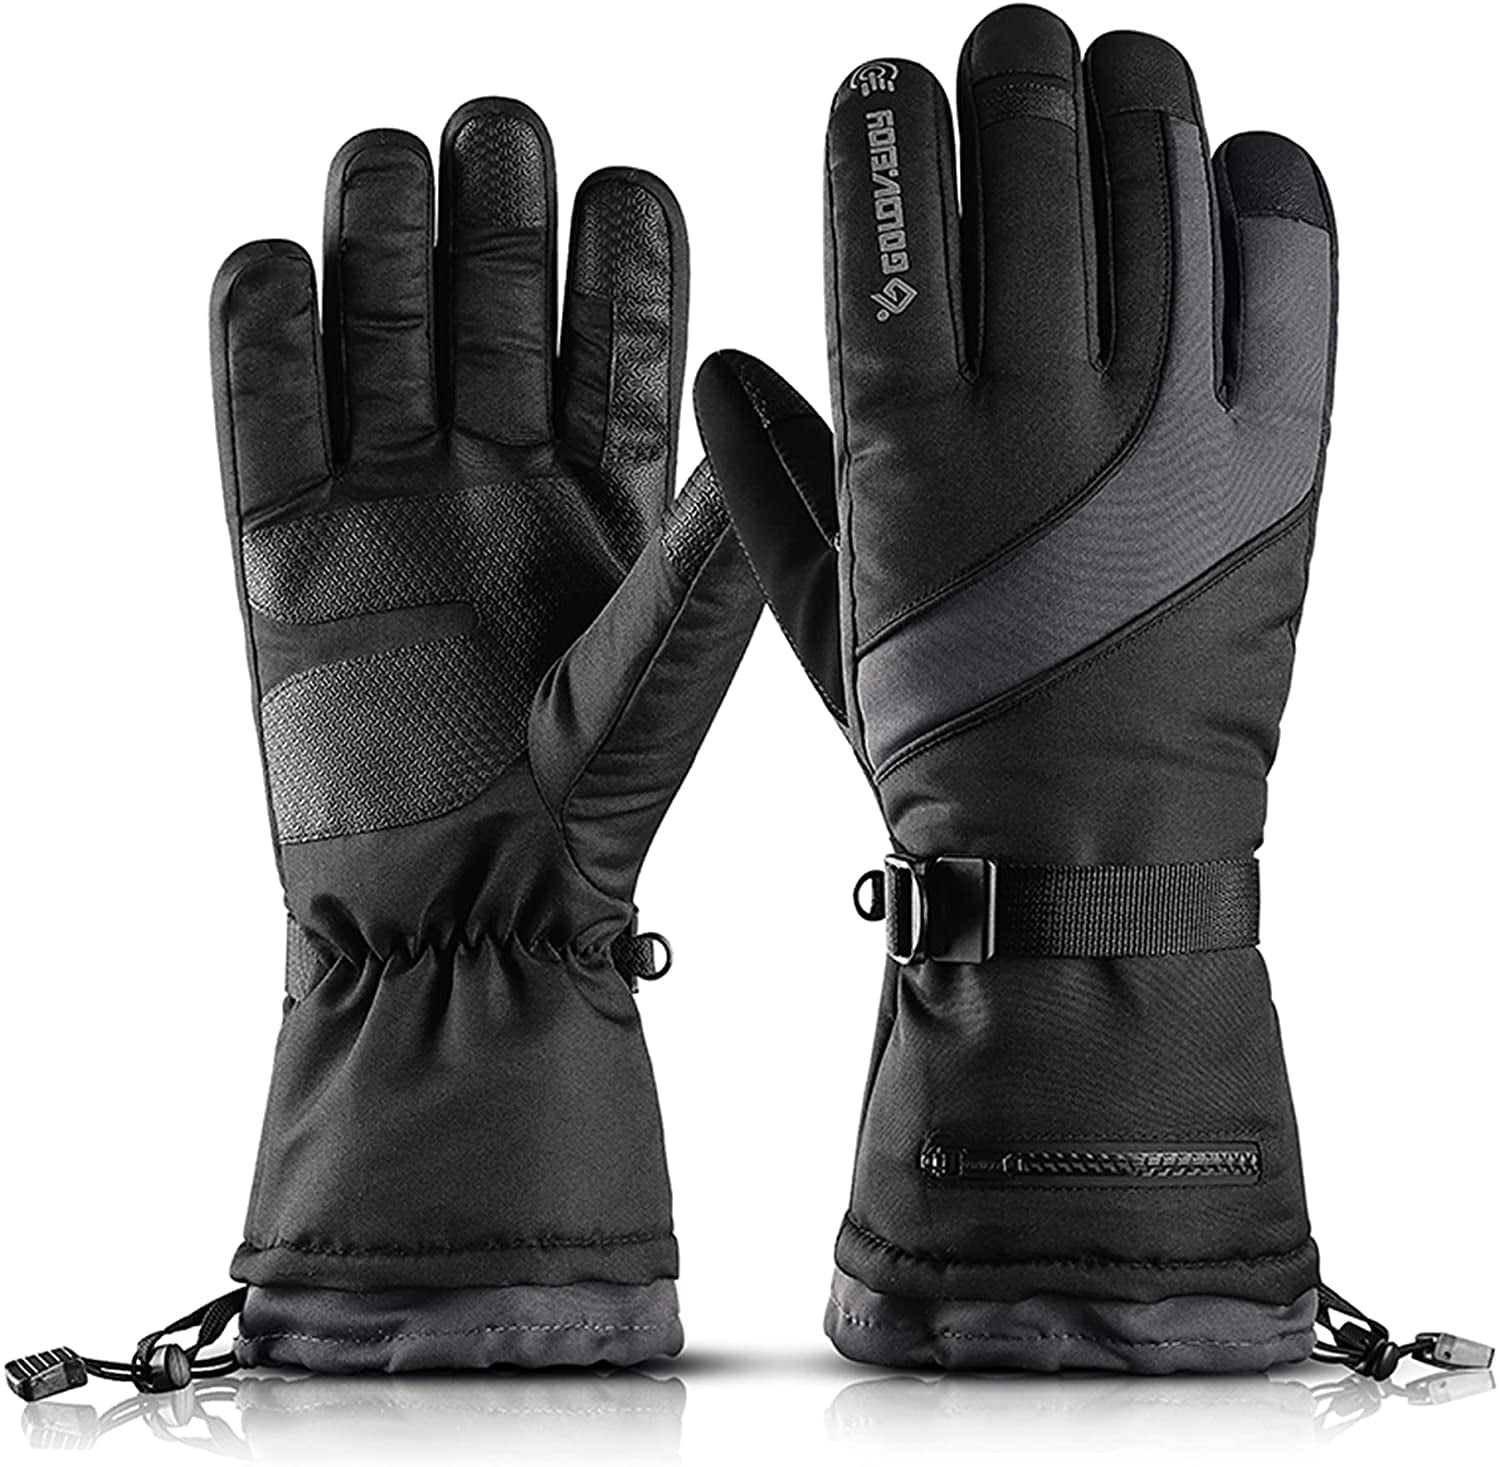 Seirus Innovation 8119 Xtreme All Weather Gauntlet Waterproof Camo Glove with Soundtouch Touch Screen Technology TOP SELLER 